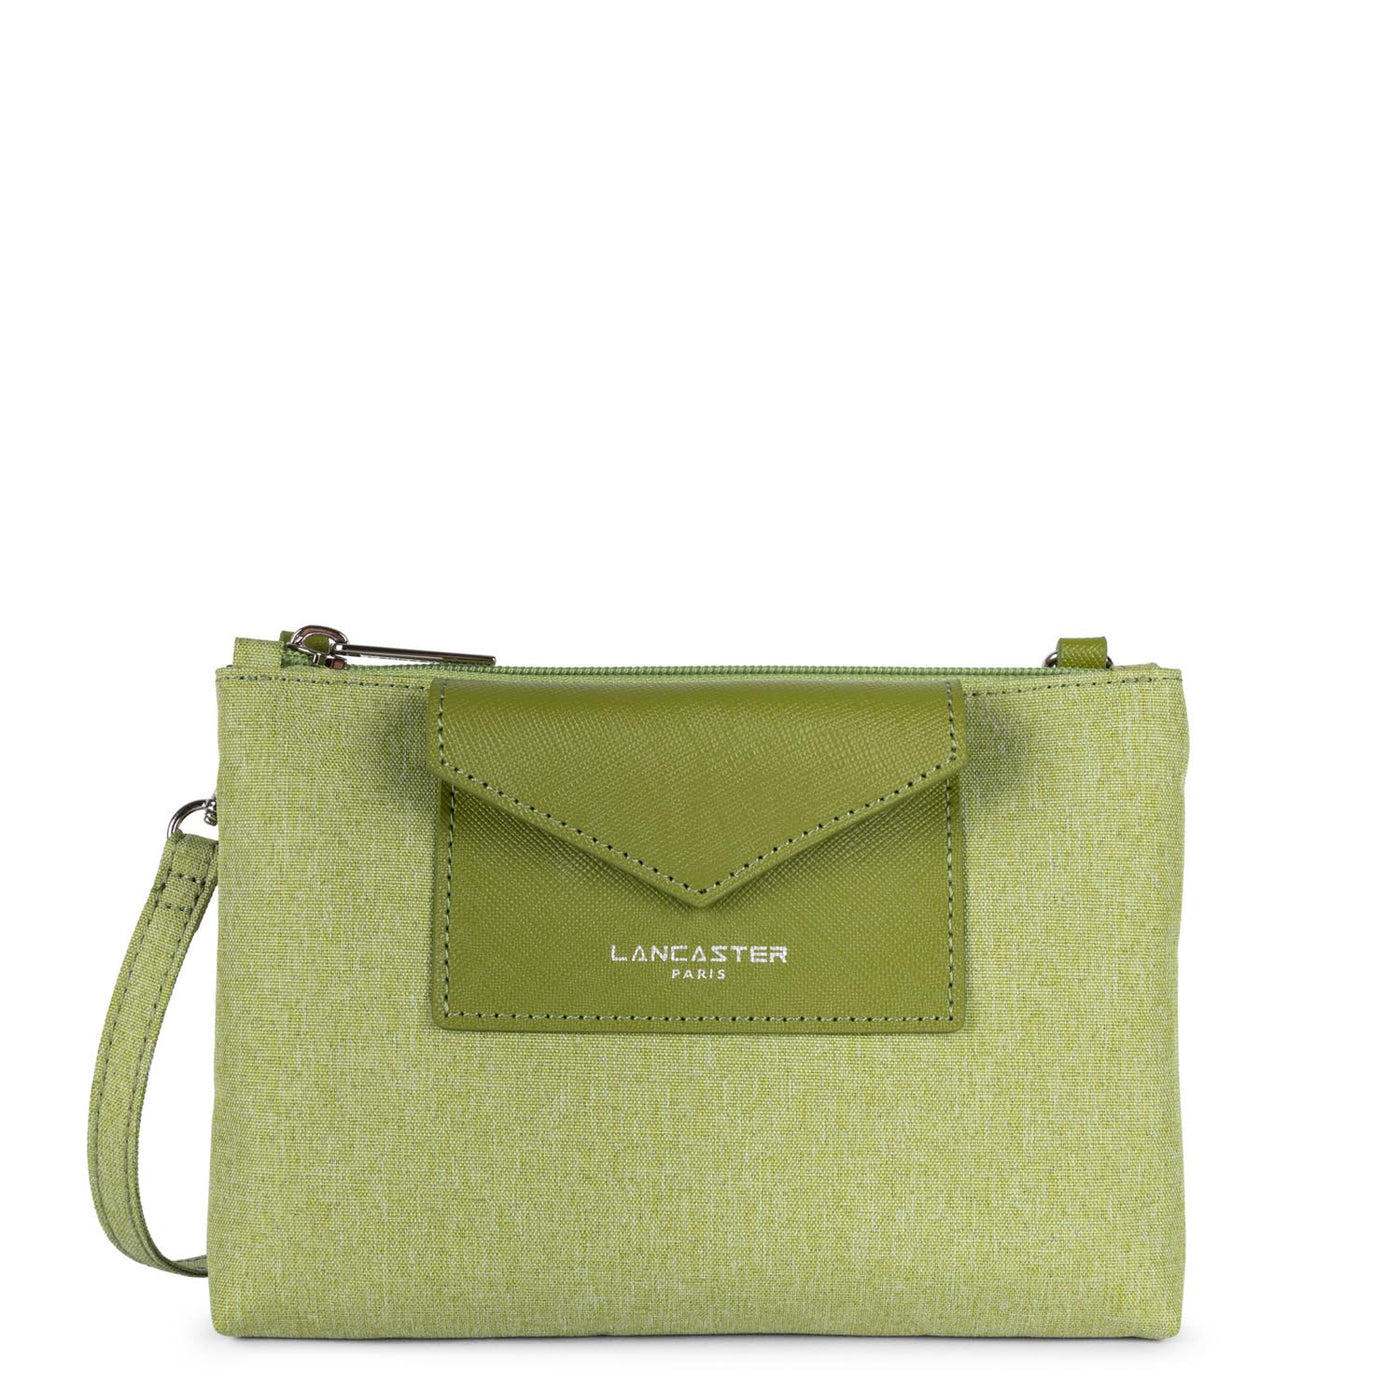 small clutch - smart kba #couleur_olive